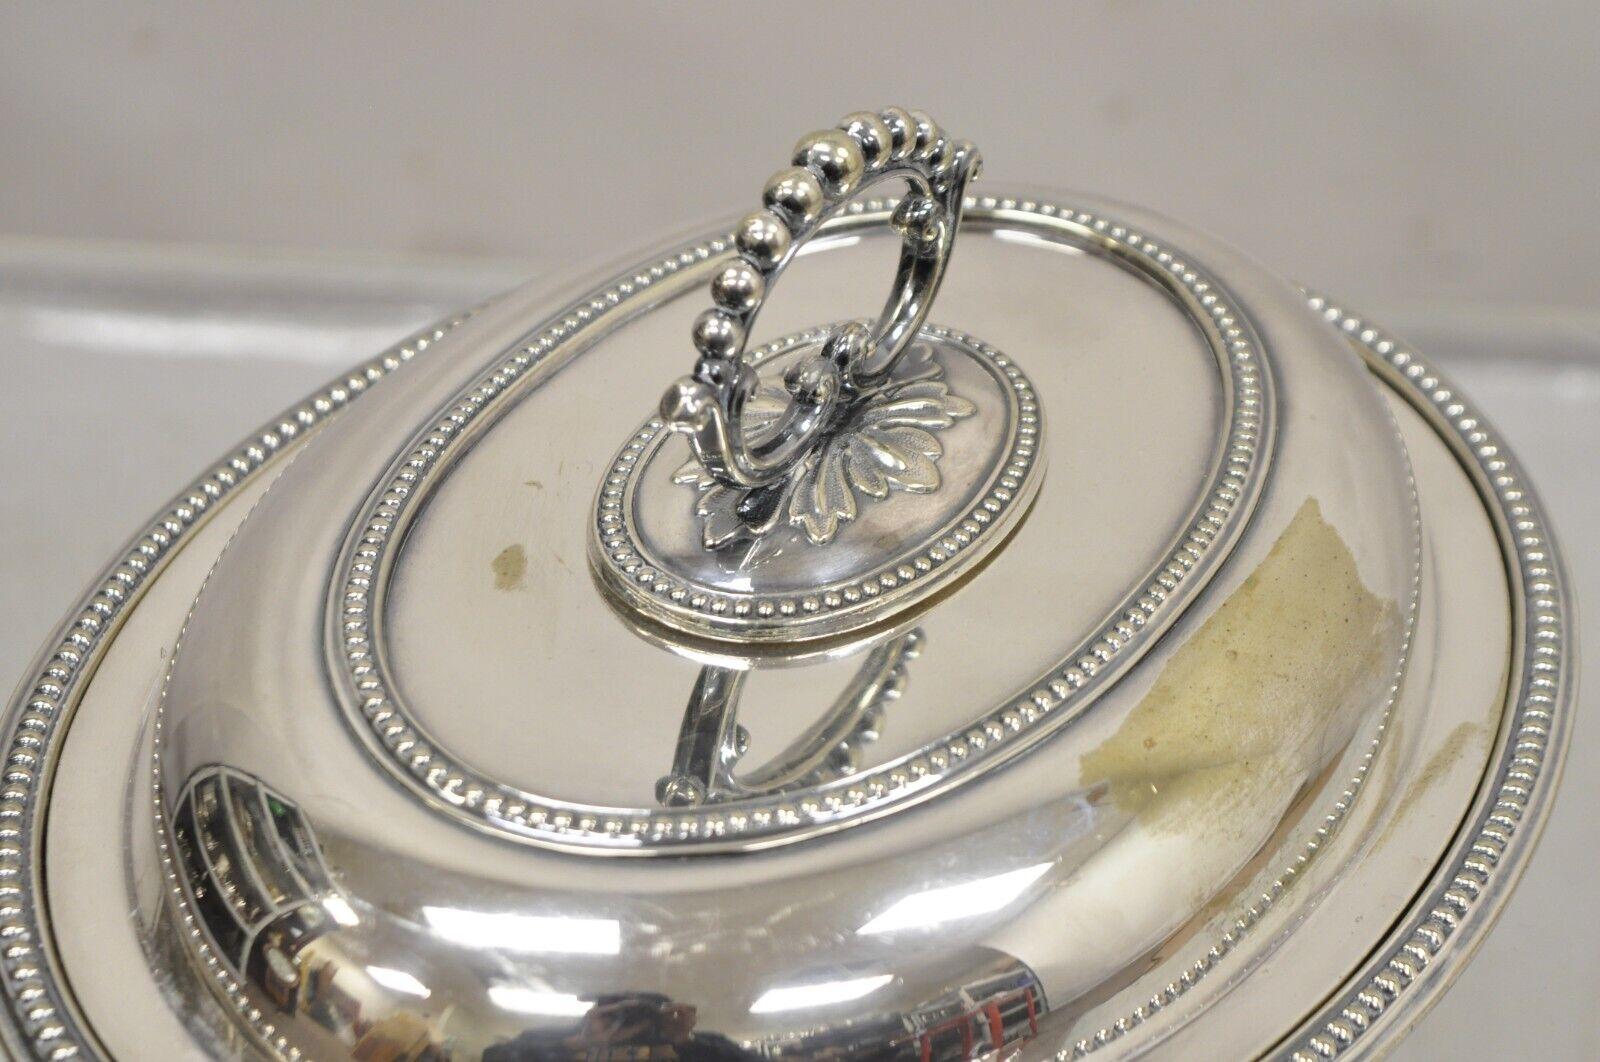 Mappin & Webb's Prince's Plate English Sheffield Silver Plated Covered Dish In Good Condition For Sale In Philadelphia, PA